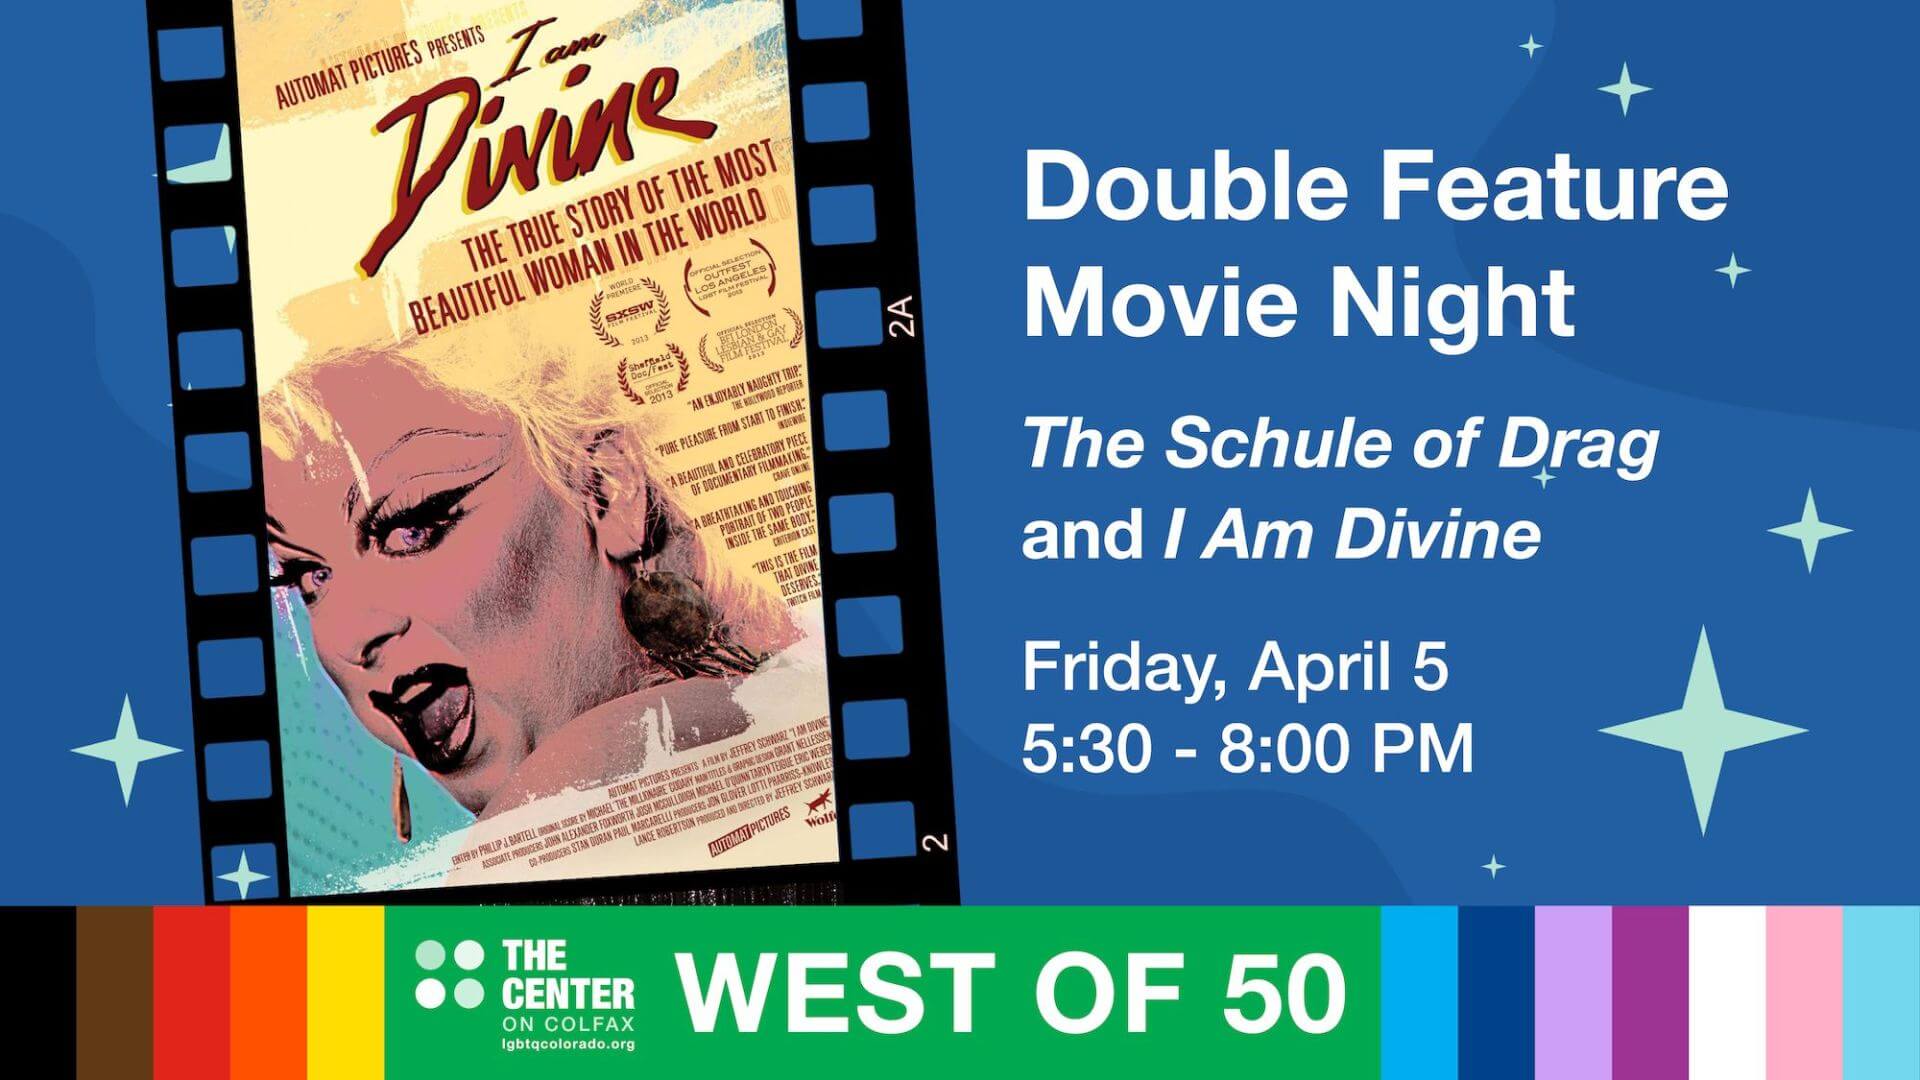 West of 50's Double Feature Movie Night: The Schule of Drag and I Am Divine